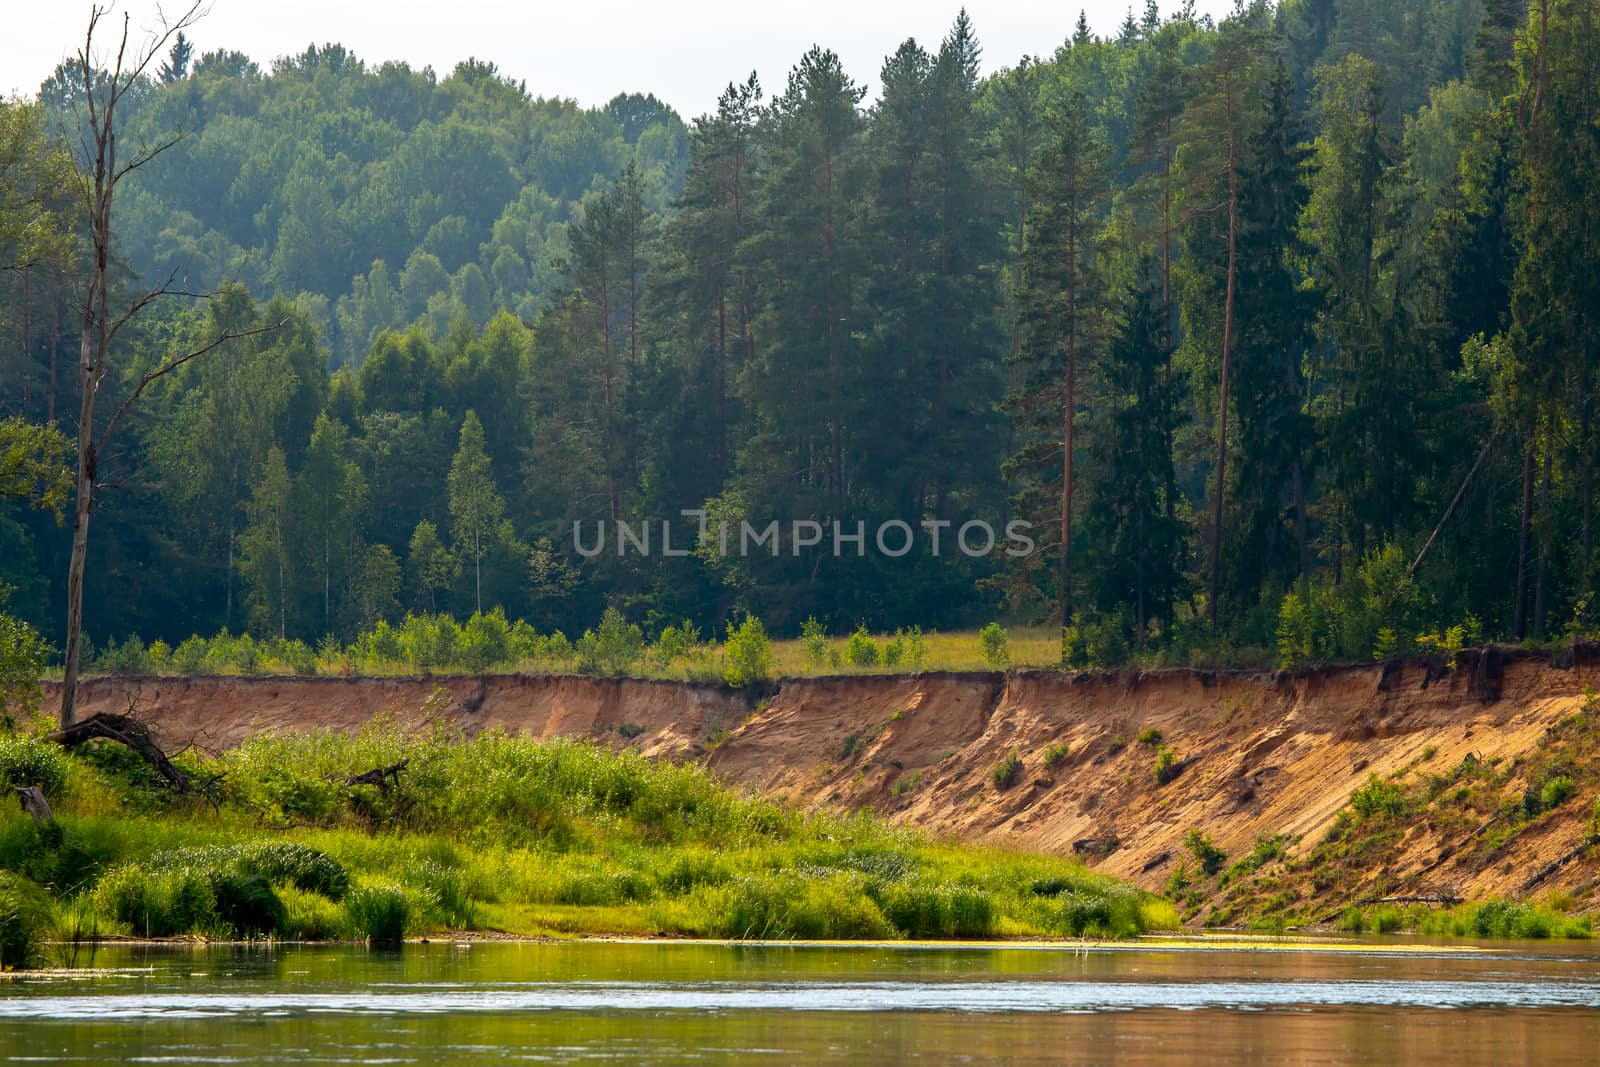 Landscape with little cliff near the river Gauja and forest in the background. The Gauja is the longest river in Latvia, which is located only in the territory of Latvia. 